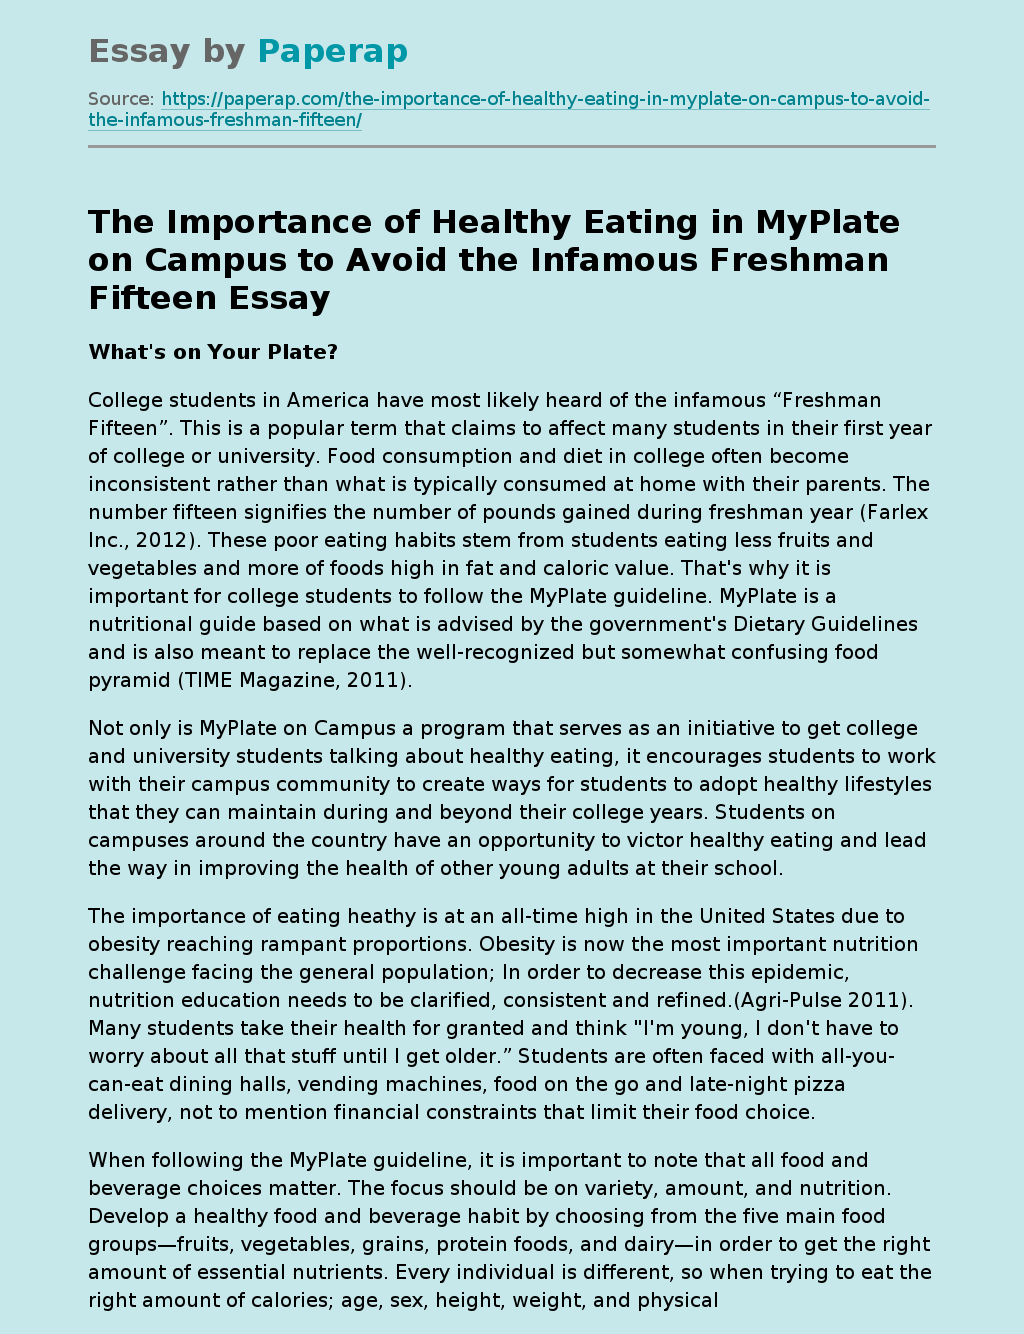 The Importance of Healthy Eating in MyPlate on Campus to Avoid the Infamous Freshman Fifteen